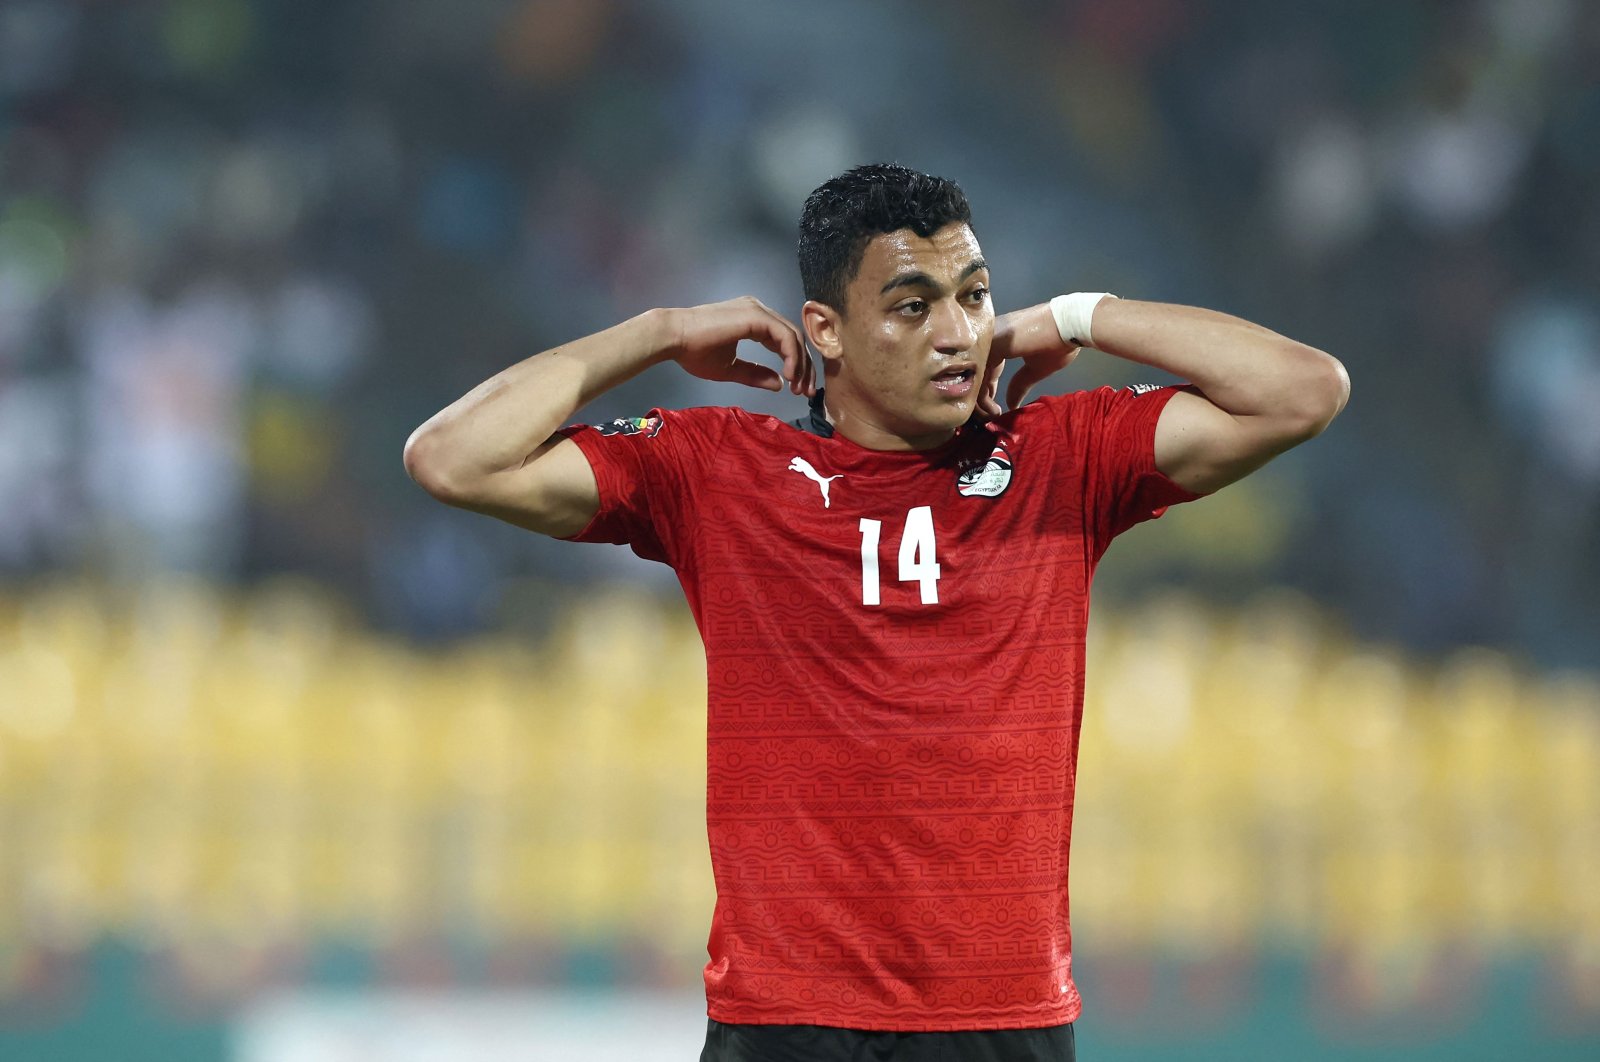 Egypt forward Mostafa Mohamed during an AFCON match against Sudan, Yaounde, Cameroon, Jan. 19, 2022. (AFP Photo)